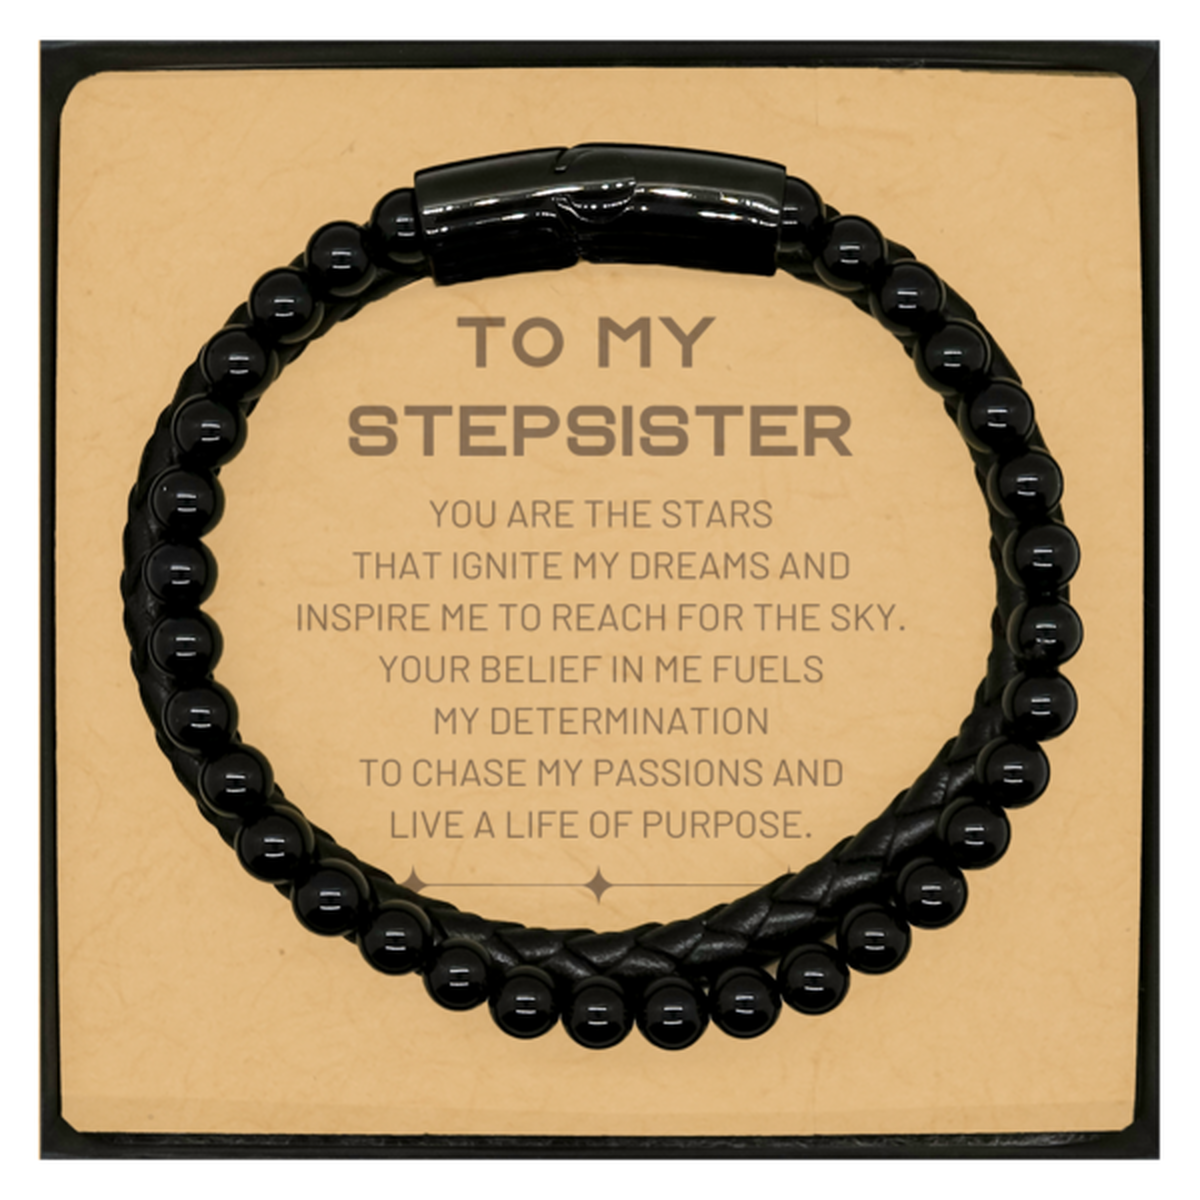 To My Stepsister Stone Leather Bracelets, You are the stars that ignite my dreams and inspire me to reach for the sky, Birthday Christmas Unique Gifts For Stepsister, Thank You Gifts For Stepsister